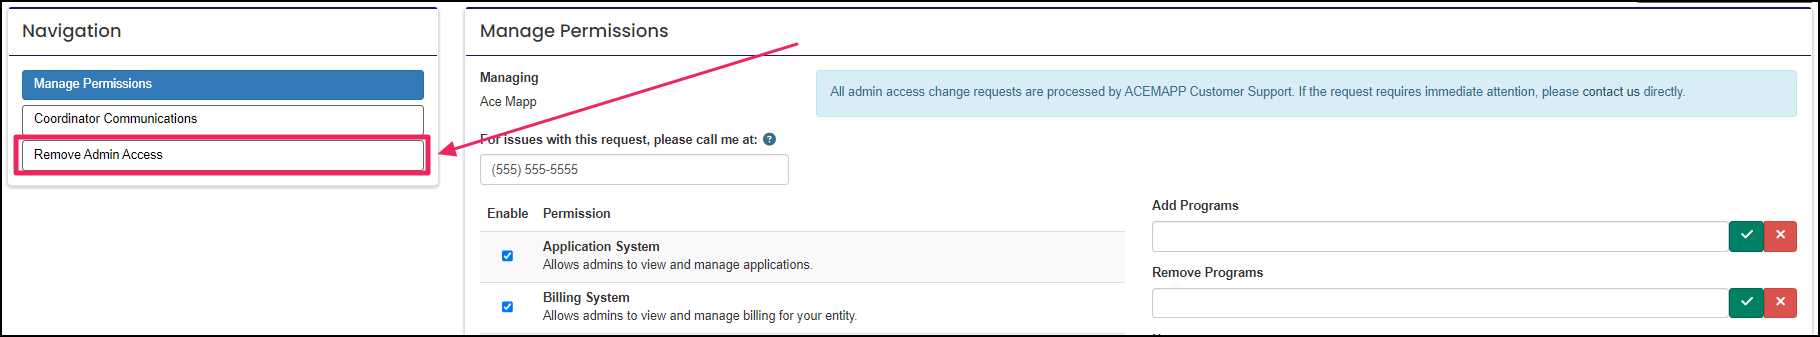 Imagte shows manage permissions page and remove admin access button.